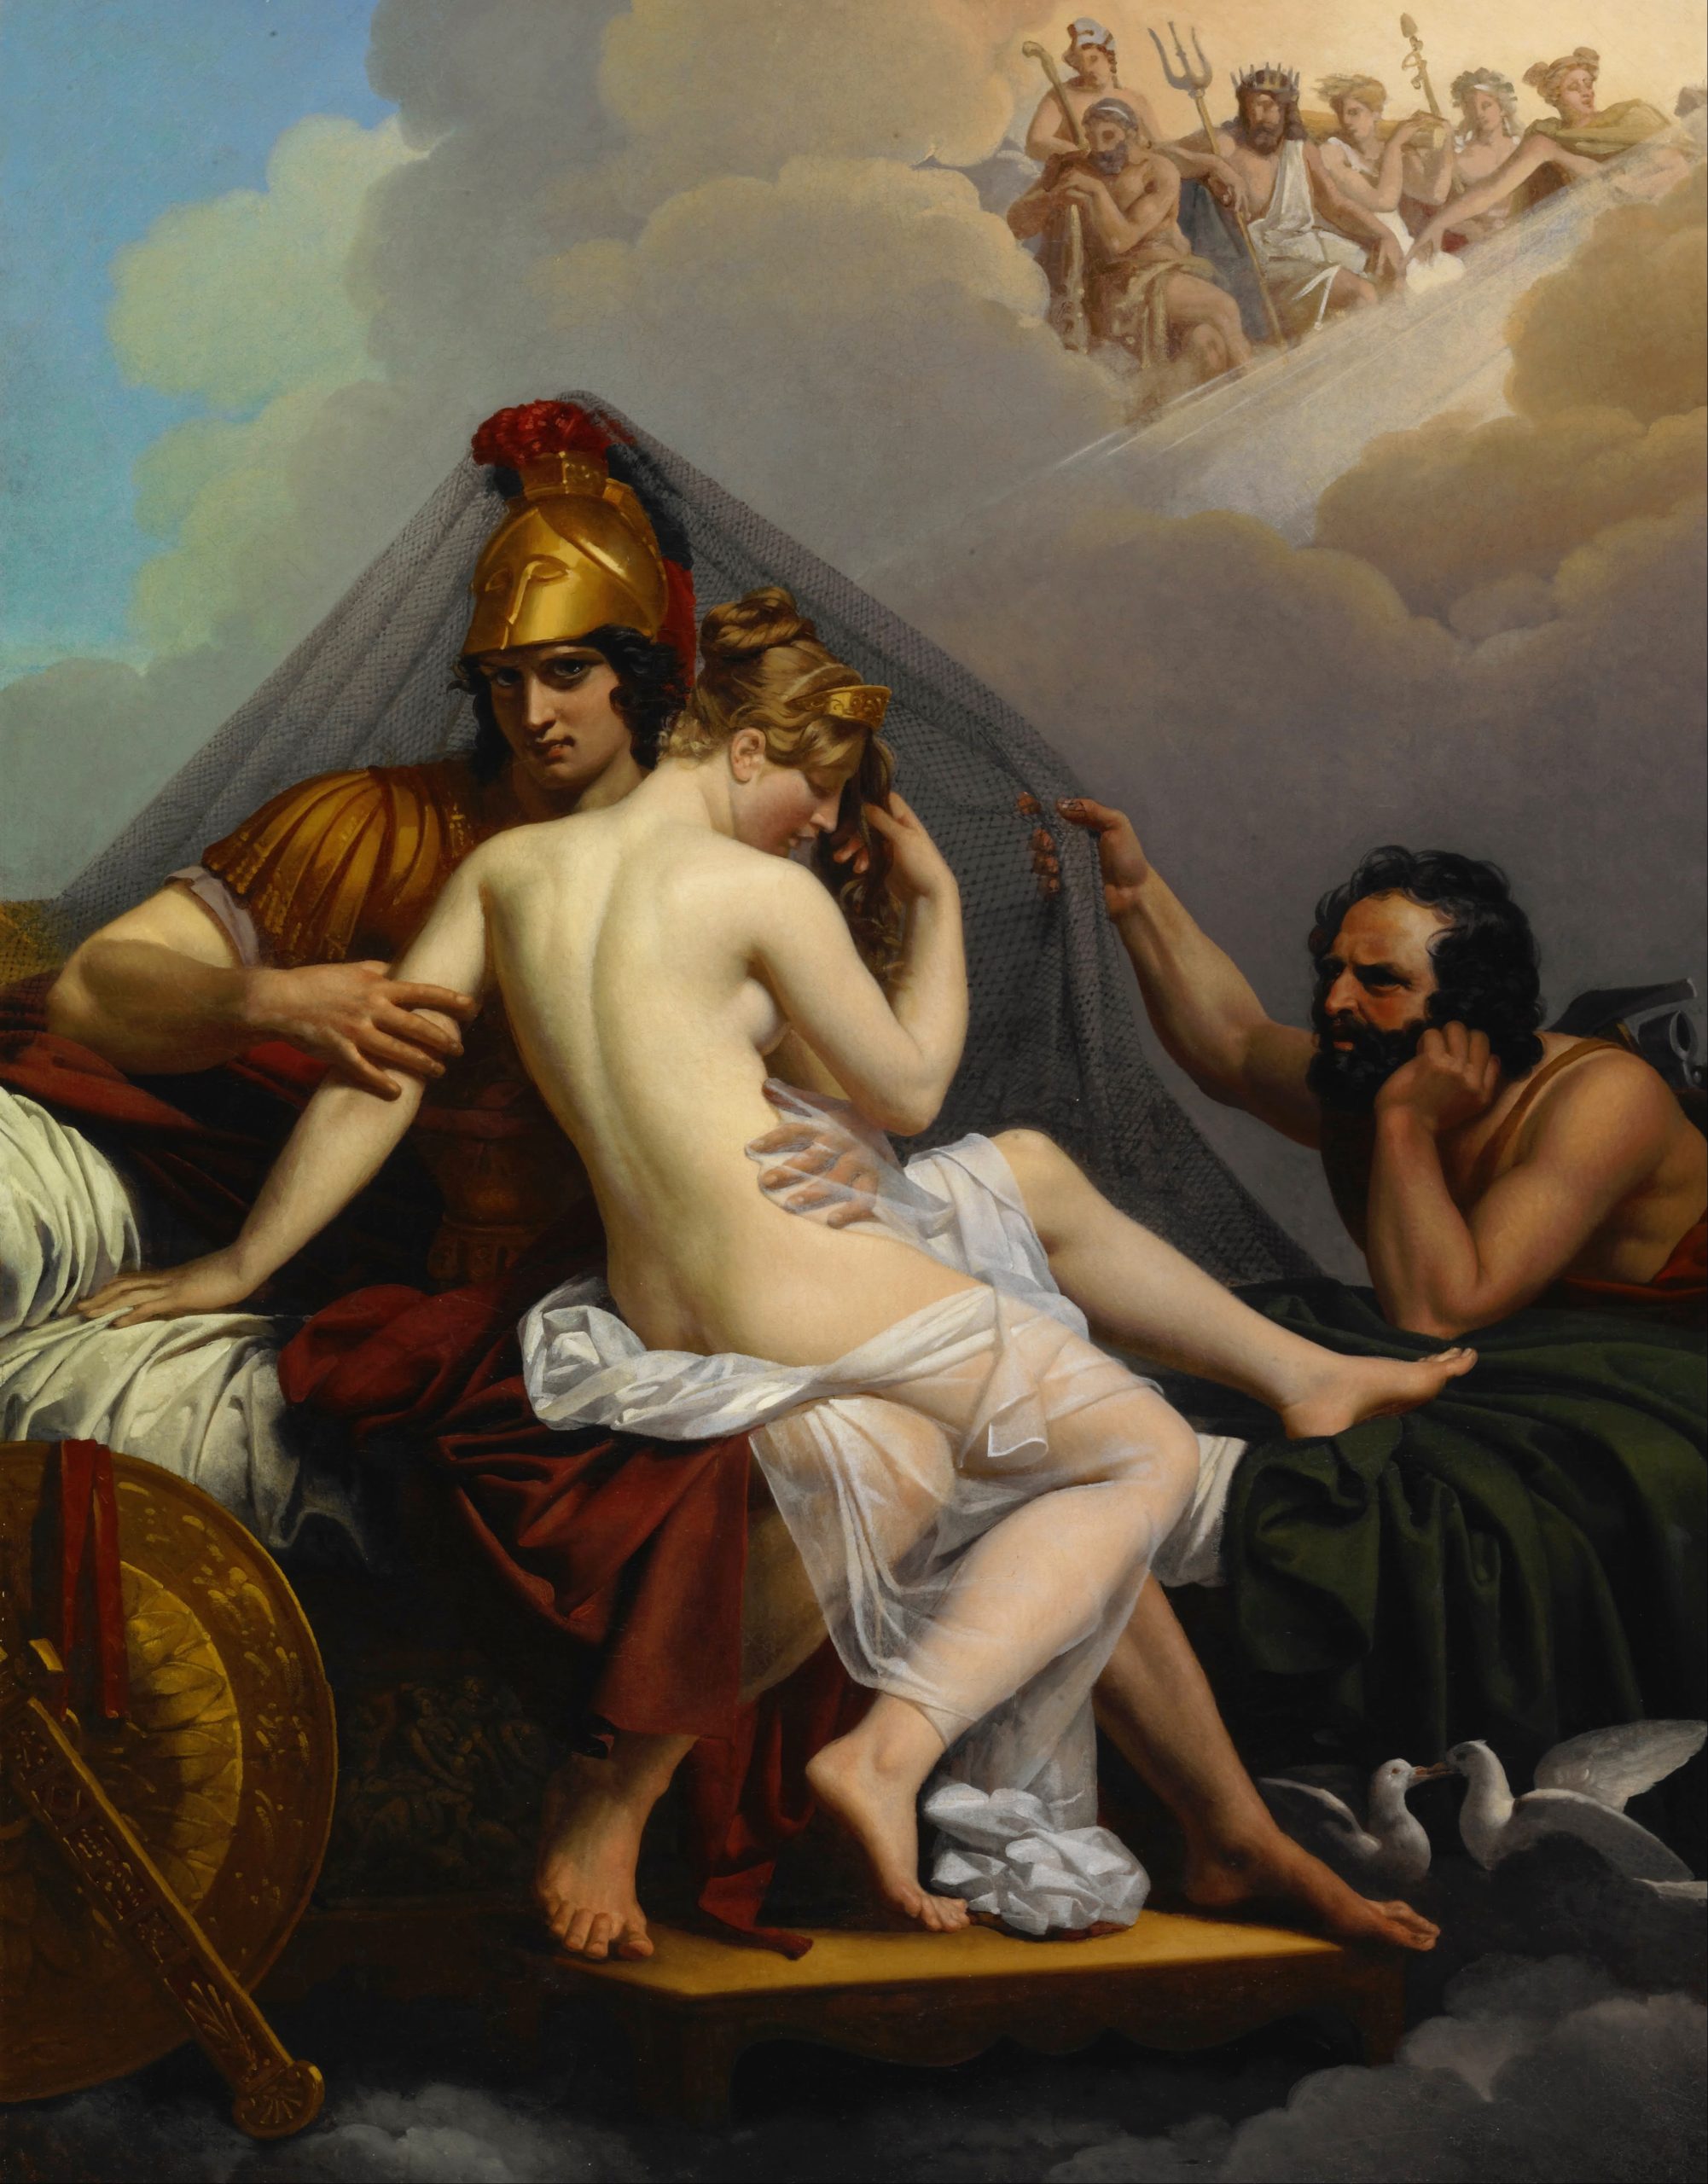 A painting of Venus and Mars being surprised by Vulcan